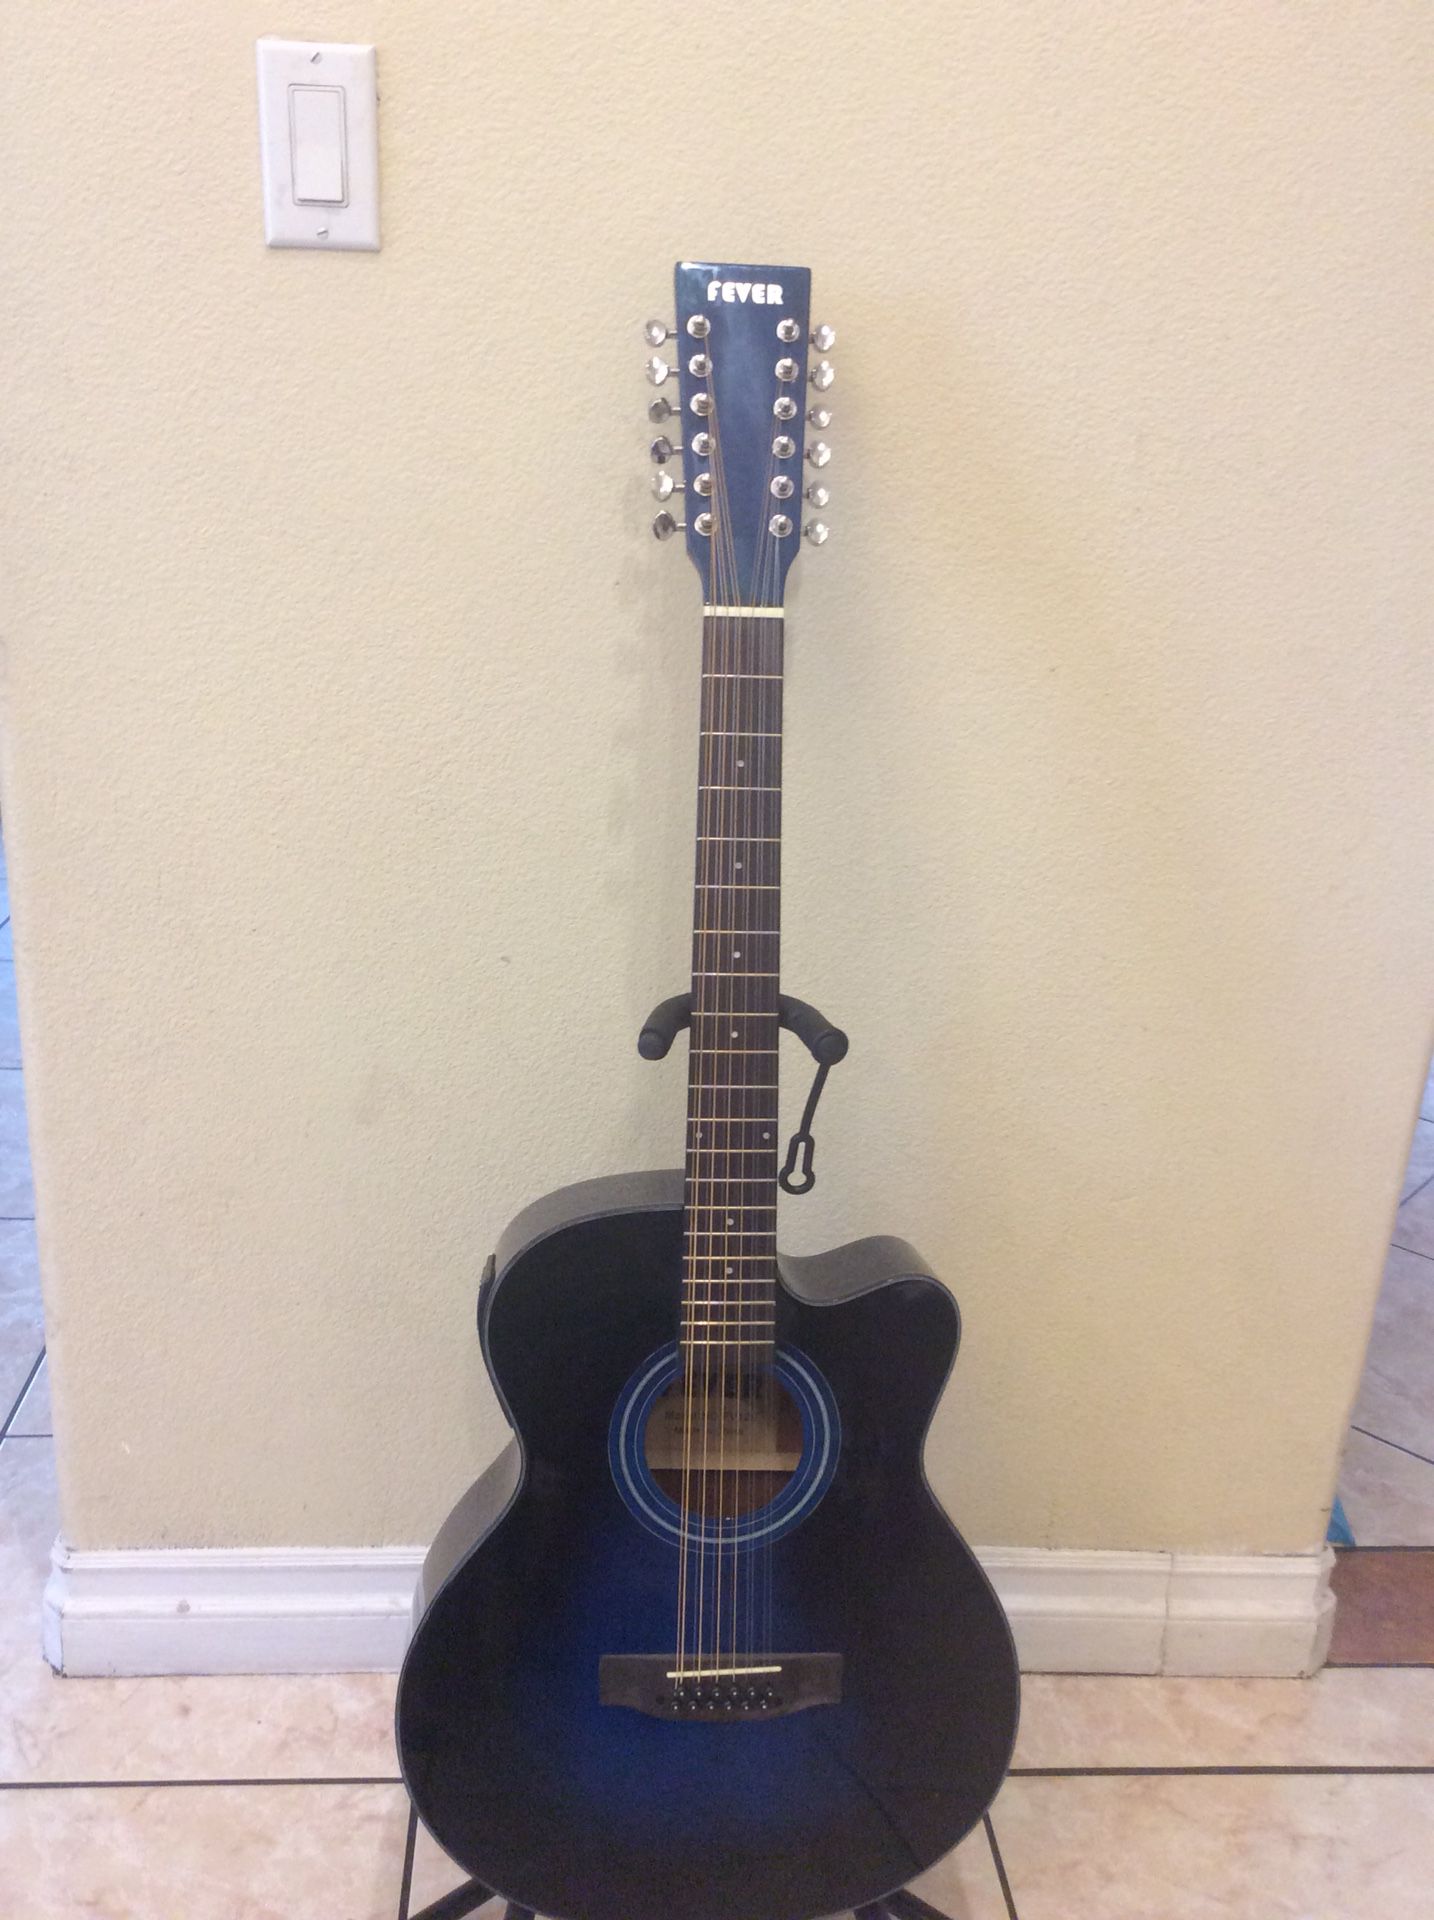 Fever 12 string electric acoustic guitar with built in tuner with soft case strap and cable